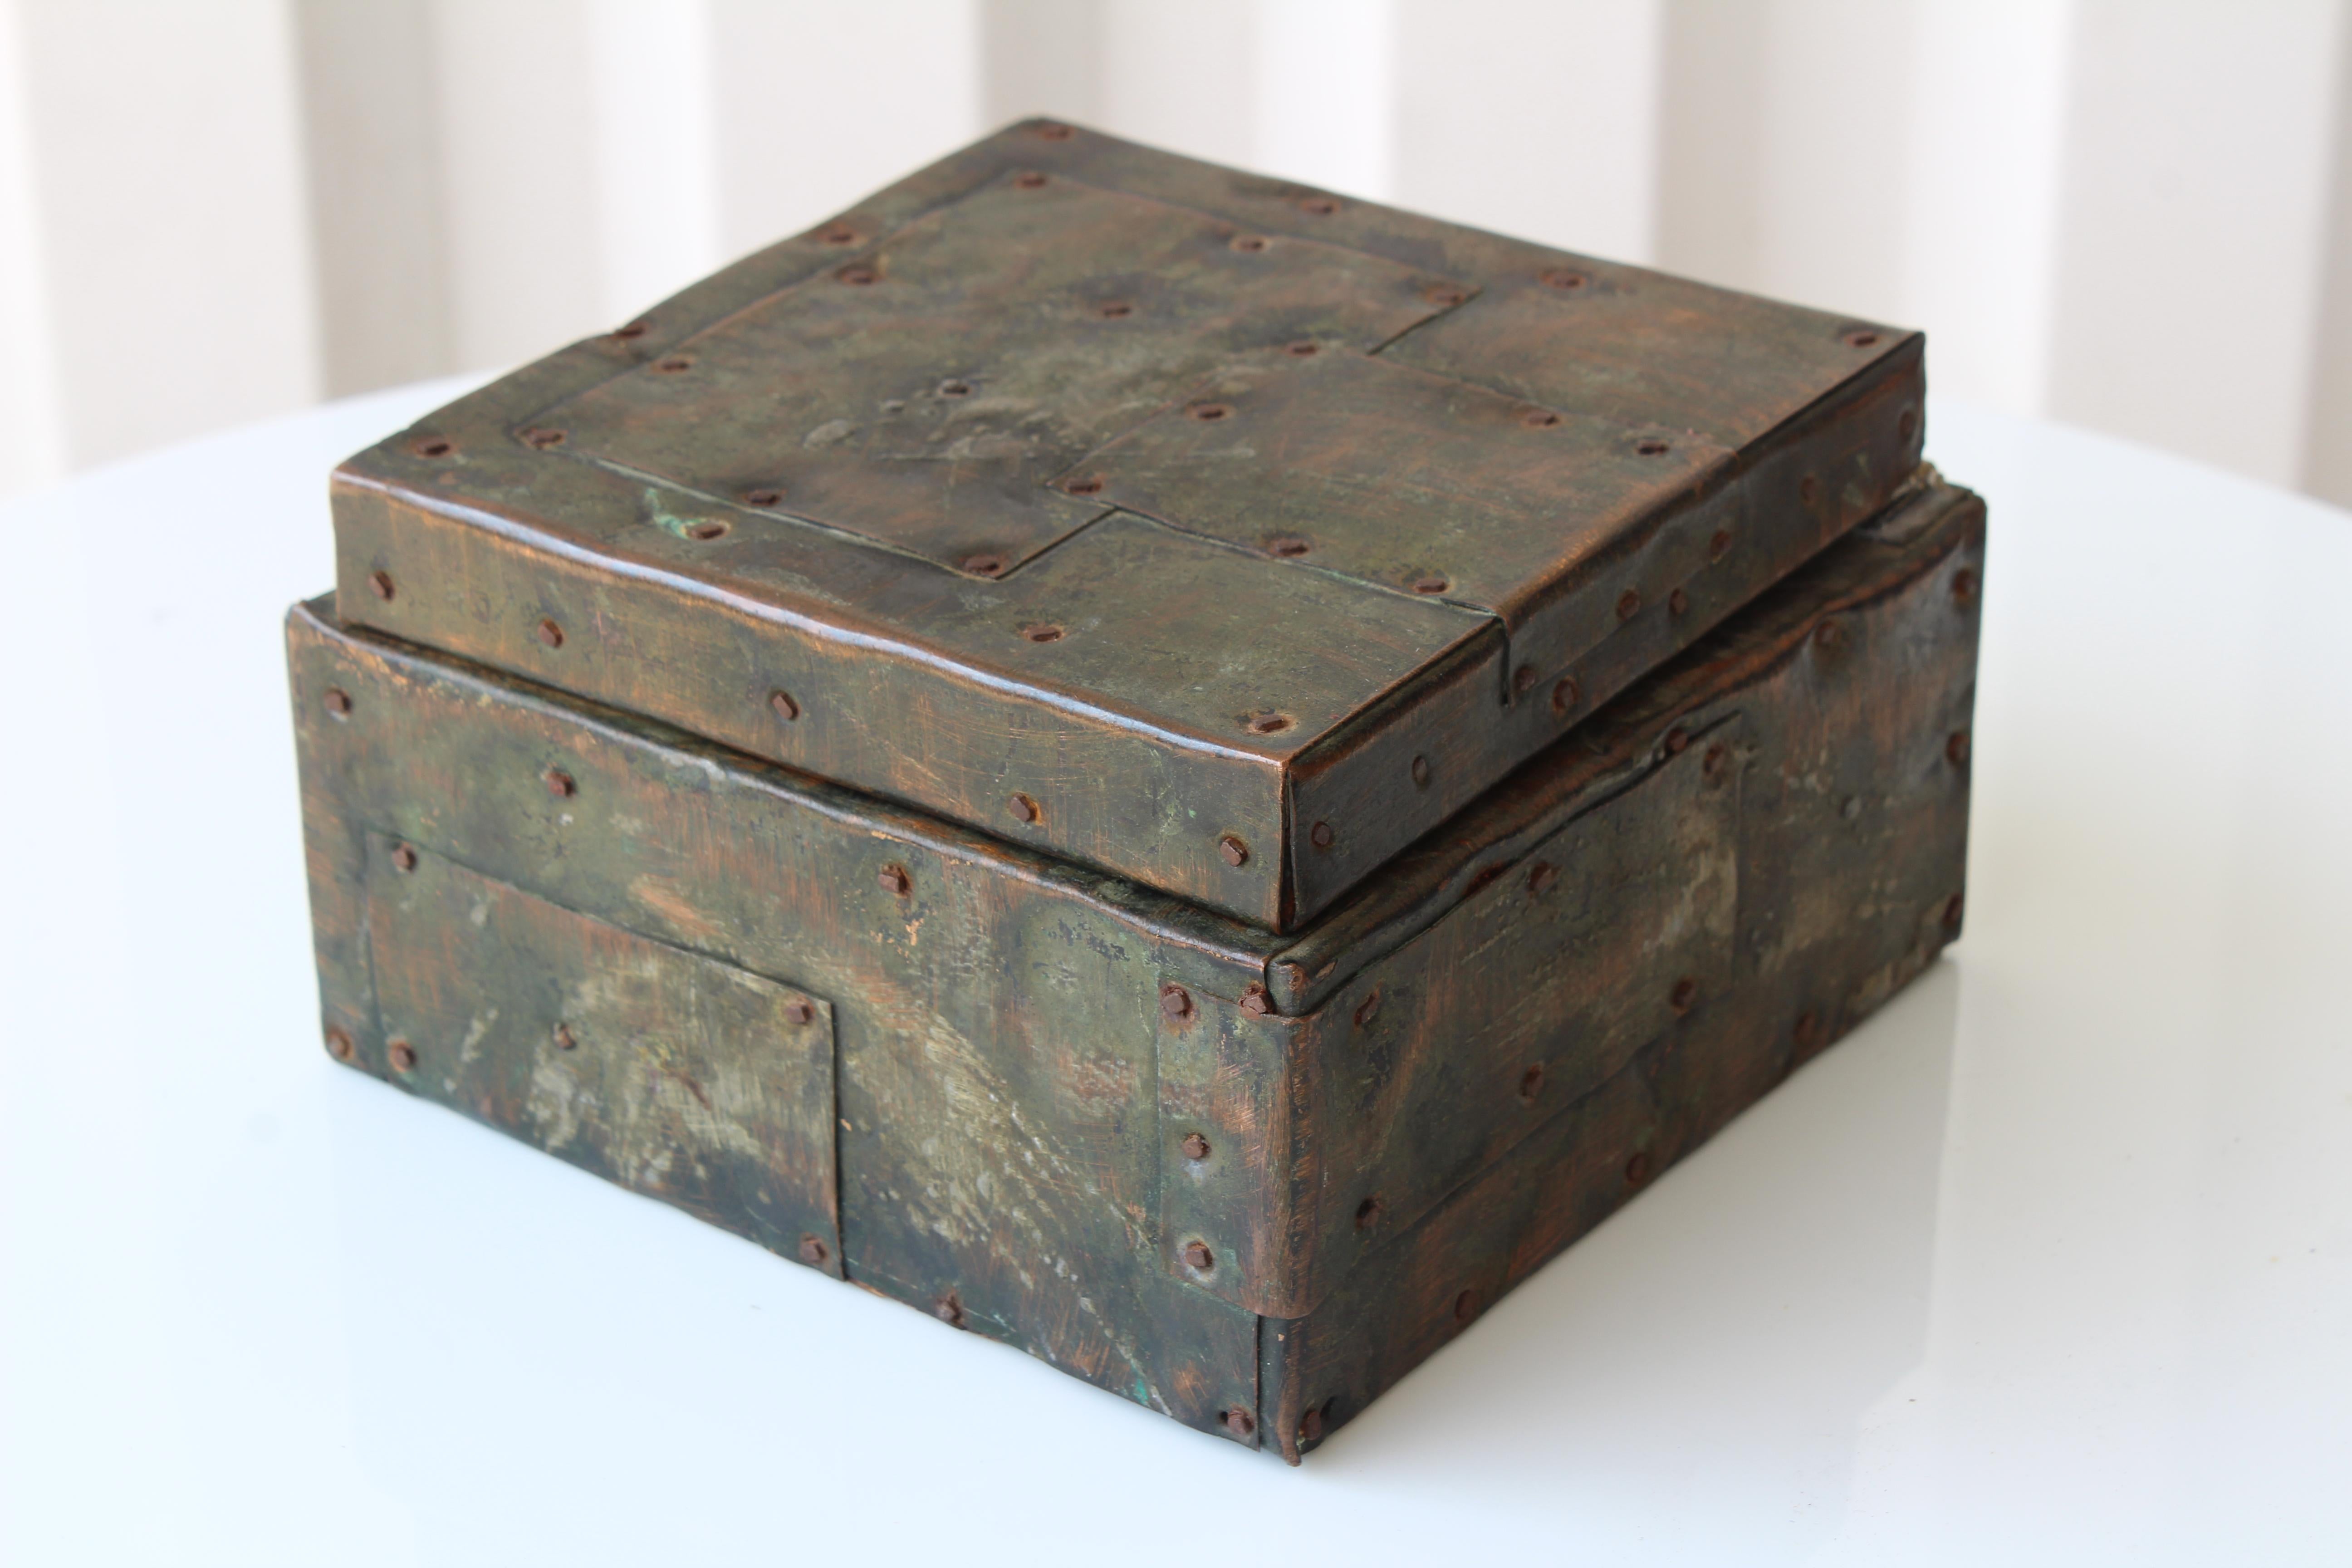 Metal clad lidded box by Paul Evans, U.S.A, 1965. Brass, copper and steel. Shows age appropriate wear with some cork missing in the interior of the box.